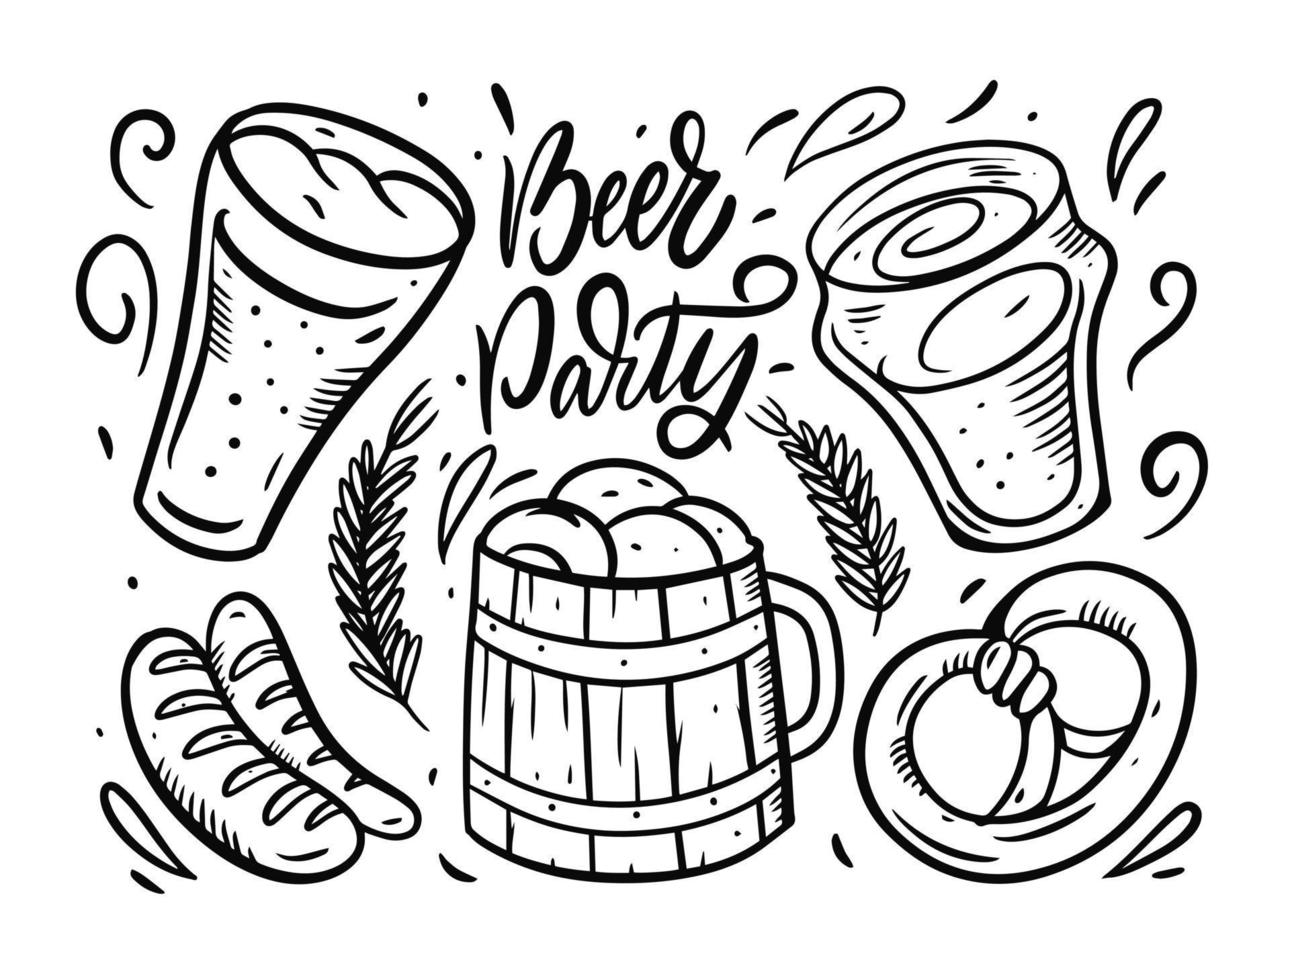 Beer party vector composition. Hand drawn black color vector illustration.